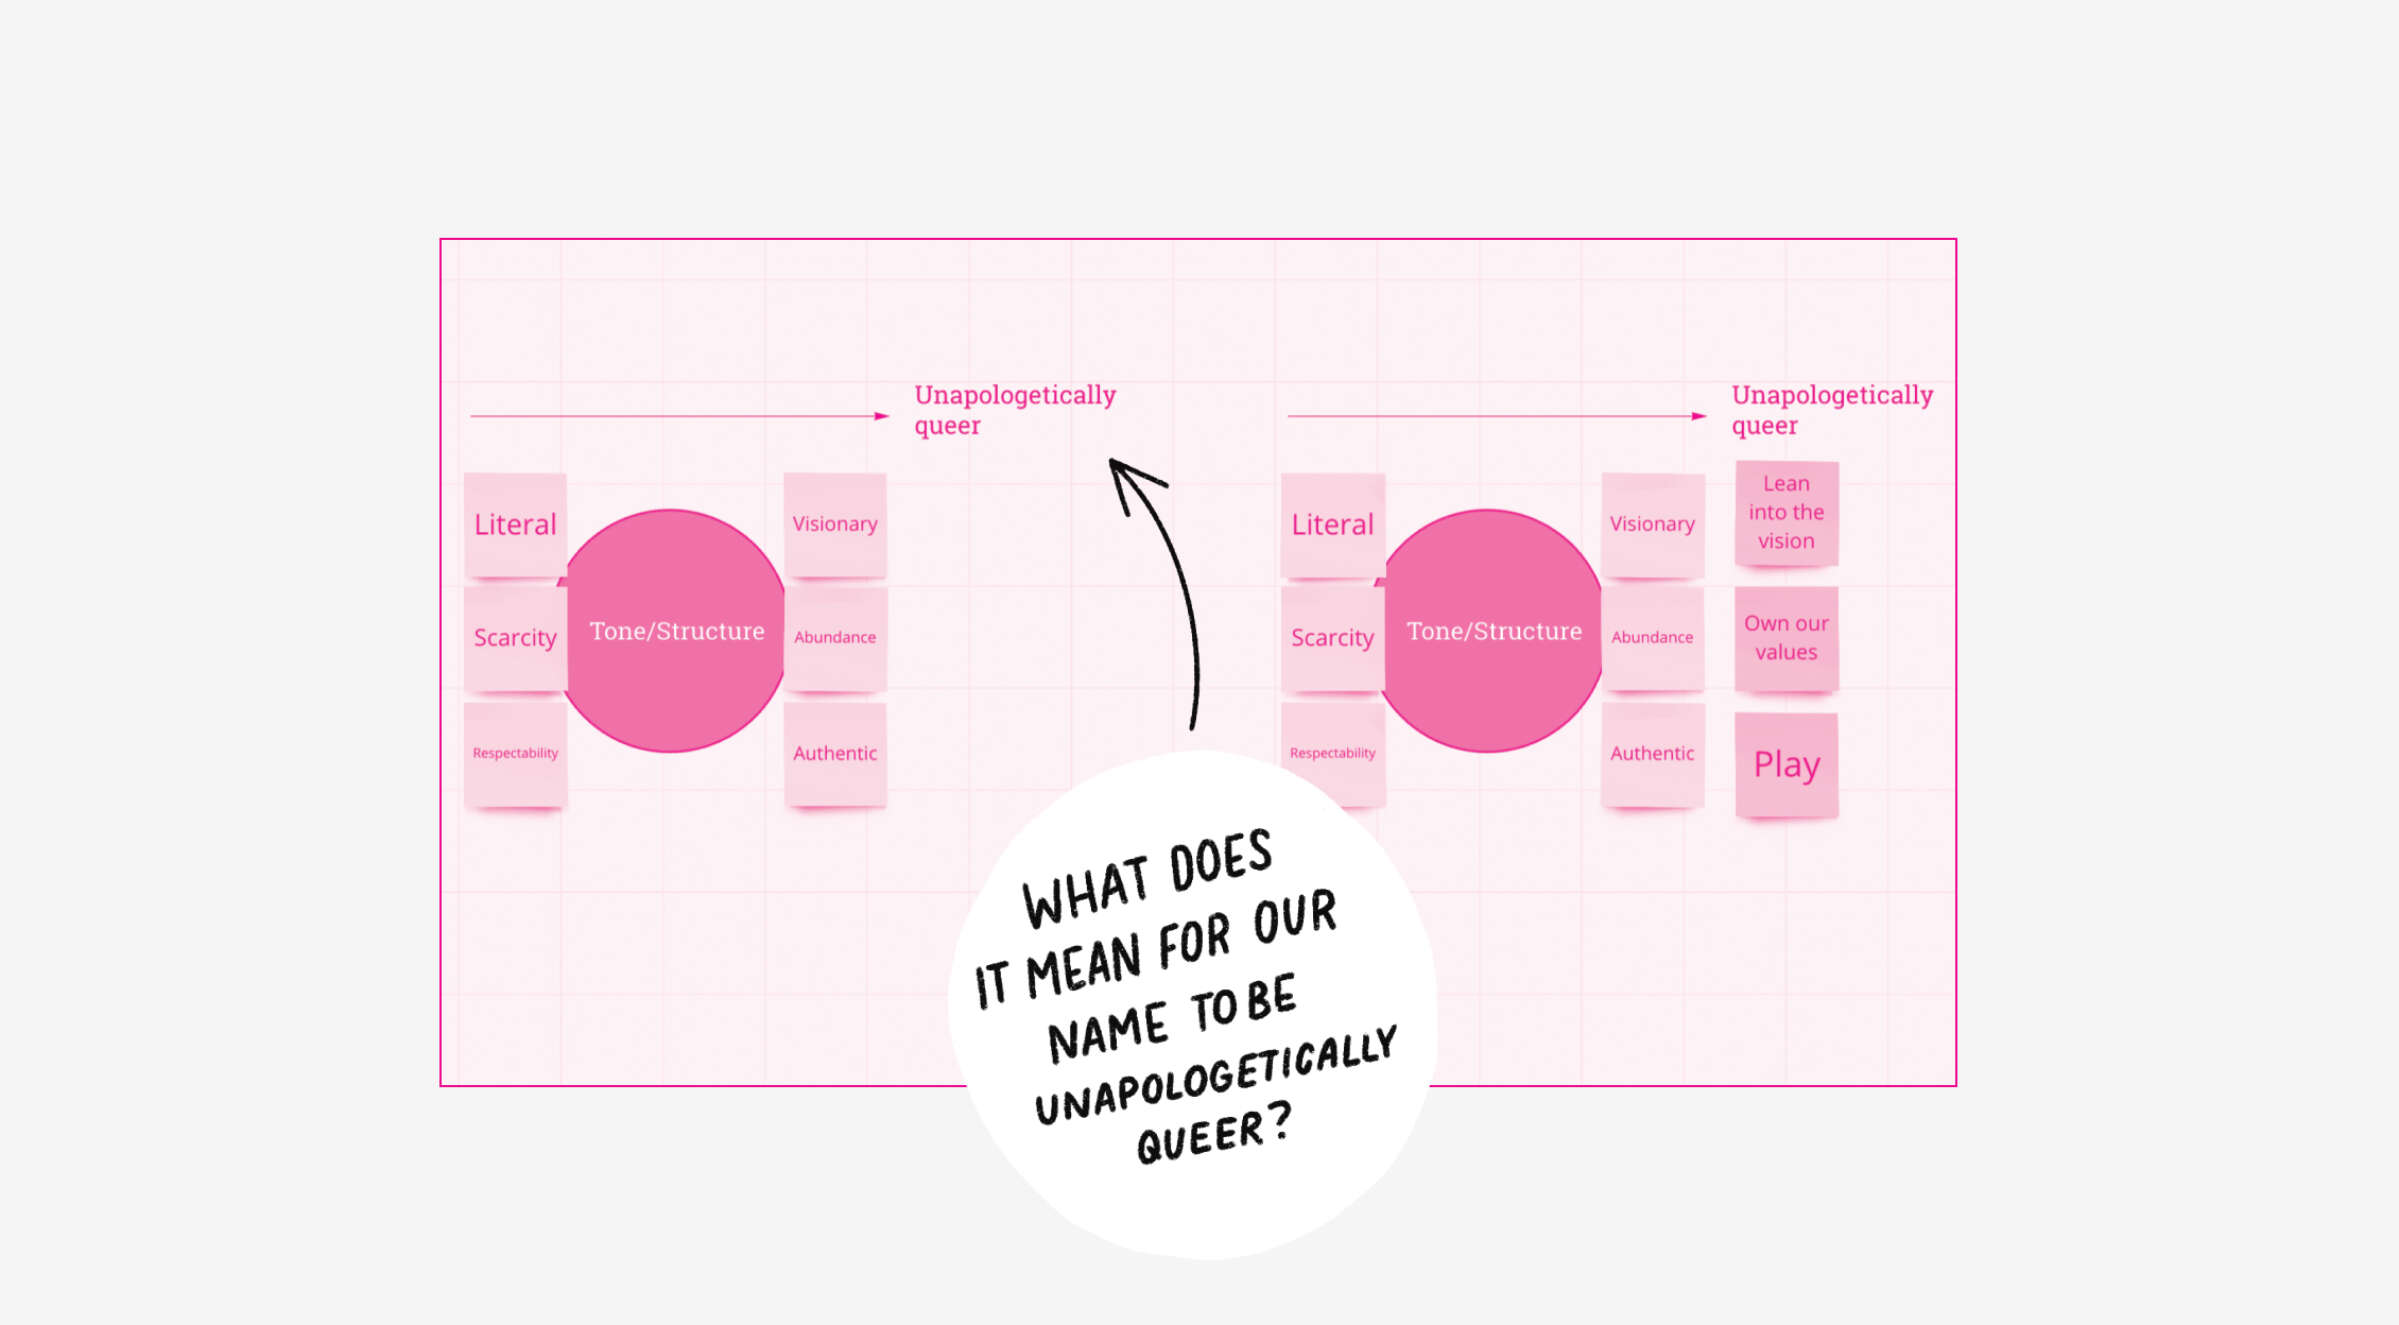 A white graphic with pink text and diagrams. At the top is the phrase "Unapologetically queer" and lower down is a large white circle containing the question, "What does it mean for our name to be unapologetically queer?" The diagram shows two sets of slides.